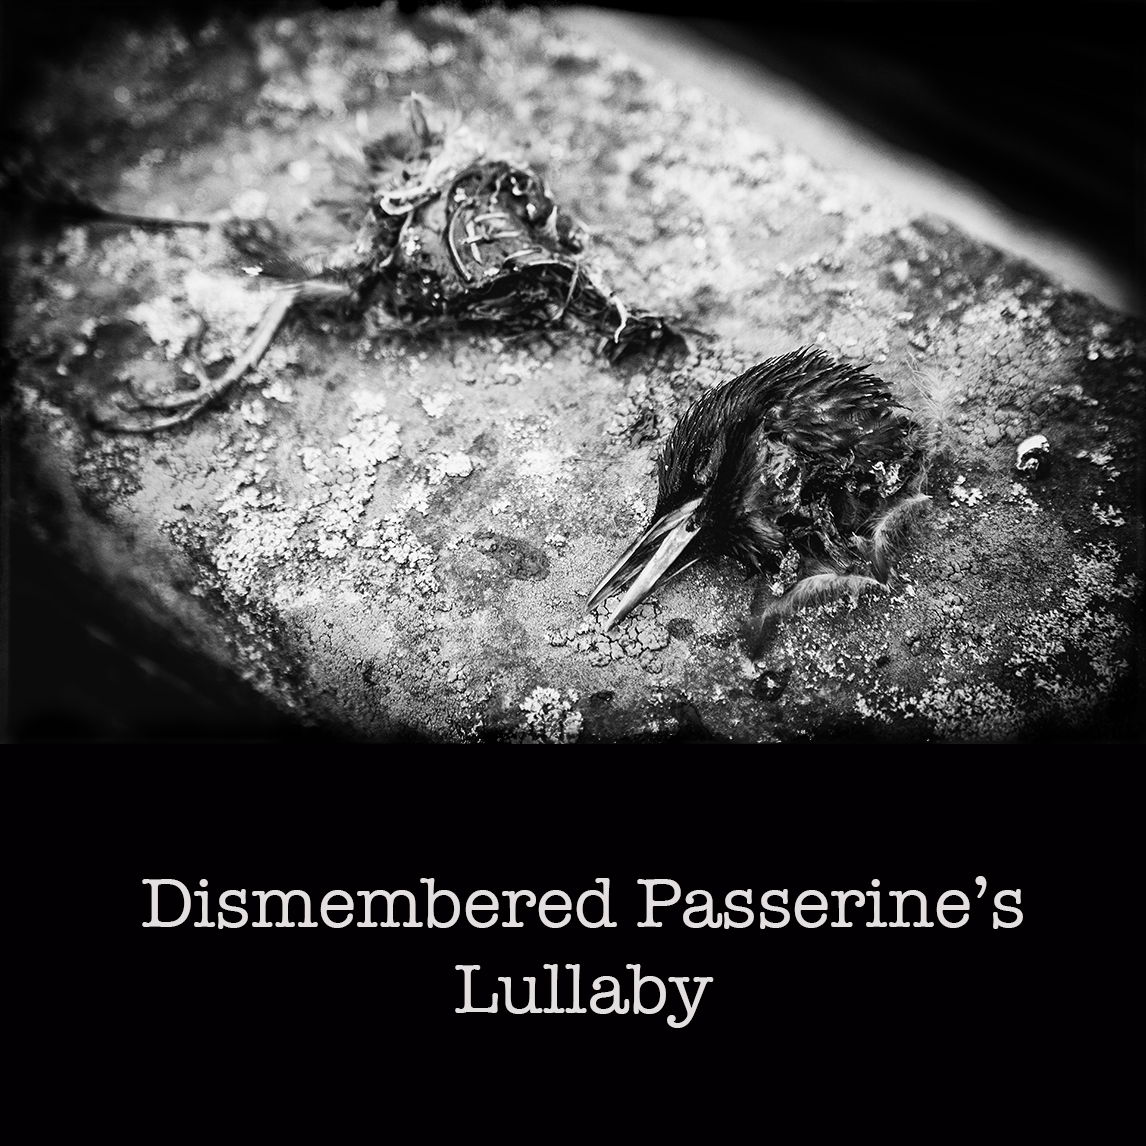 Dismembered Passerine's Lullaby